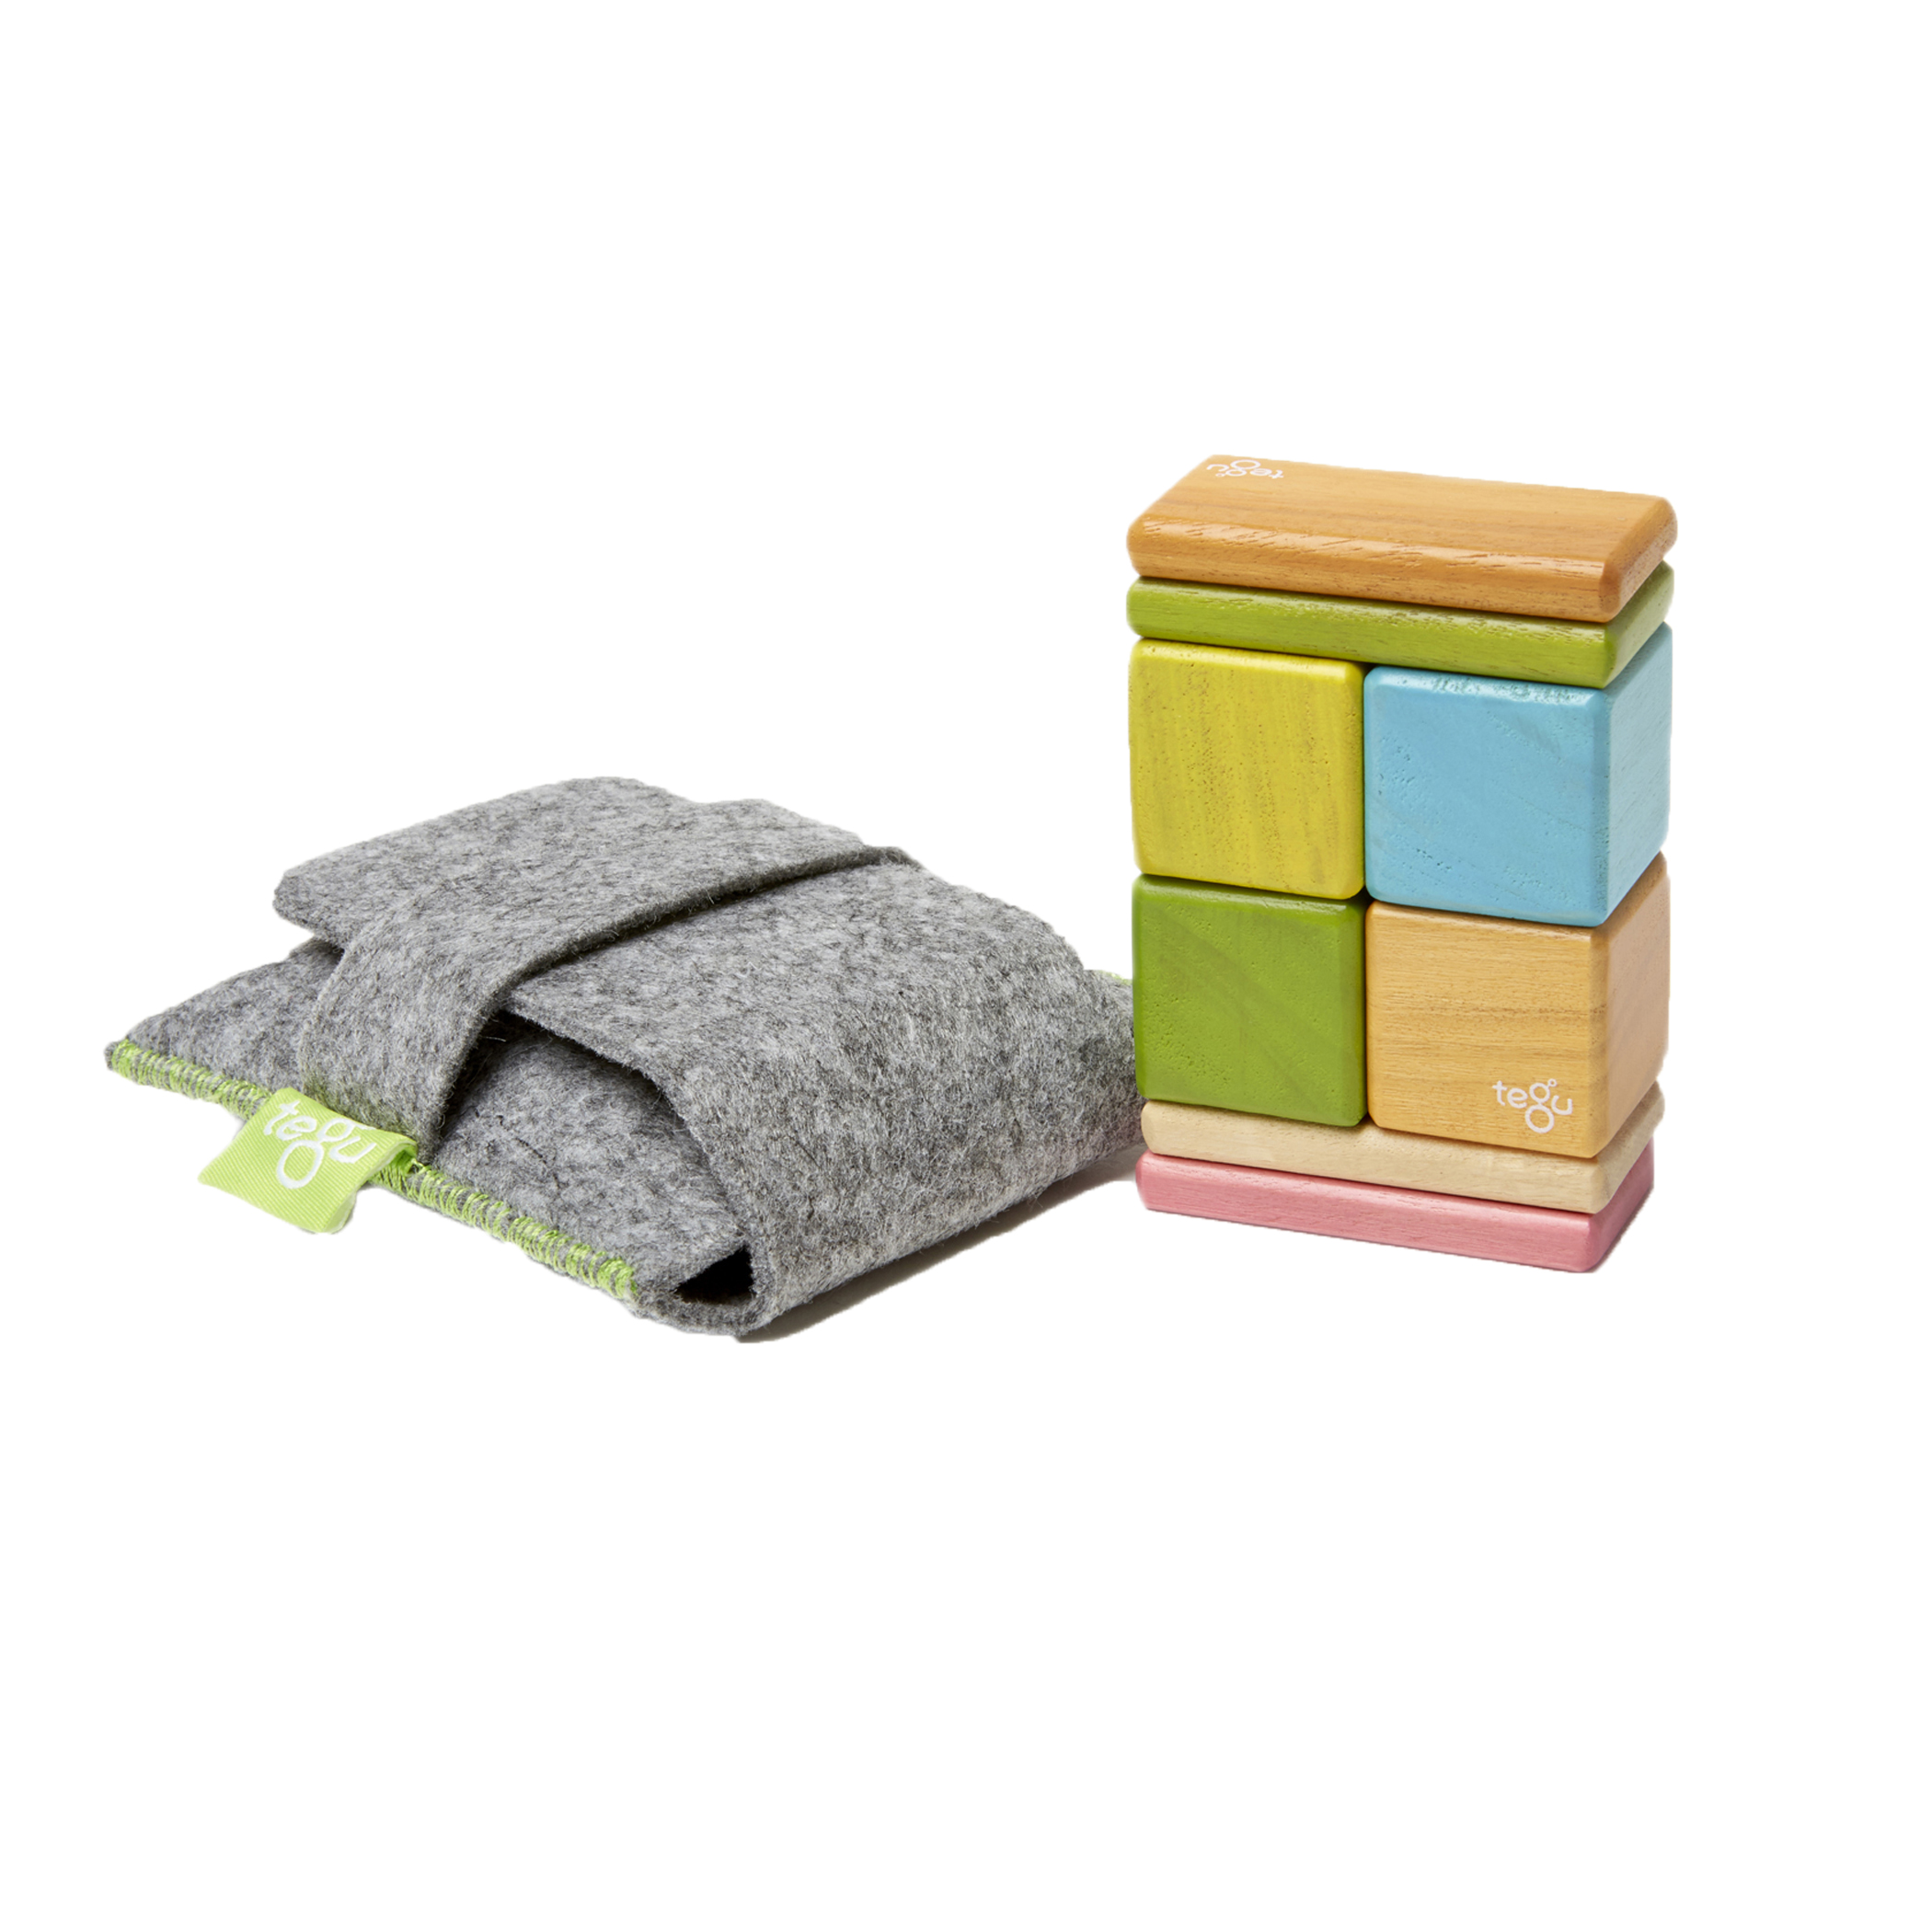 Tegu Magnetic Wooden Blocks, 8-Piece Pocket Pouch, Tints image number null